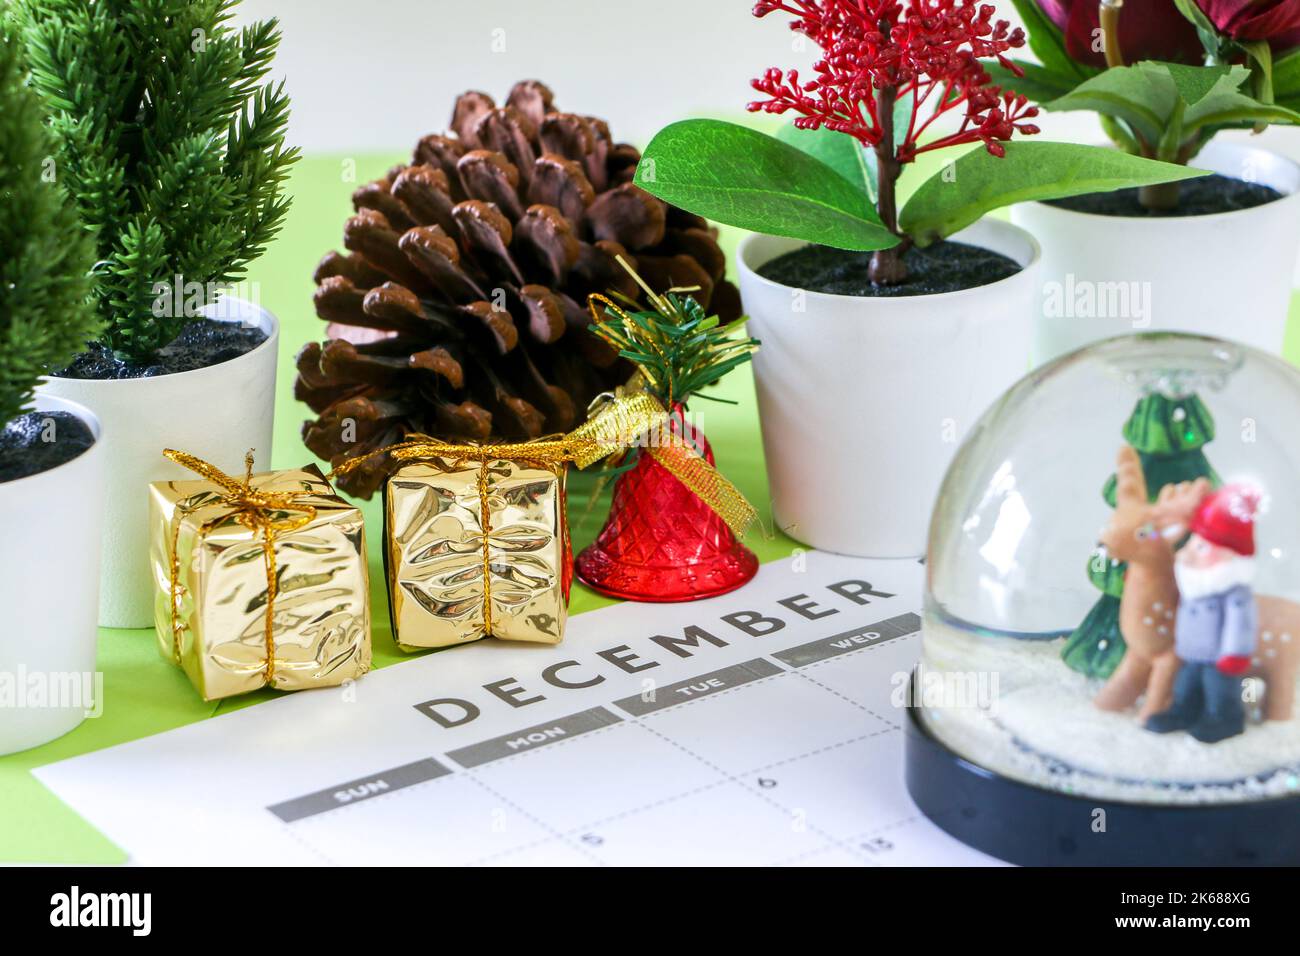 Christmas concept, December calendar along with Christmas decorations such as plants, pine cone, gold wrapped gifts and a shiny red bell, with snow gl Stock Photo